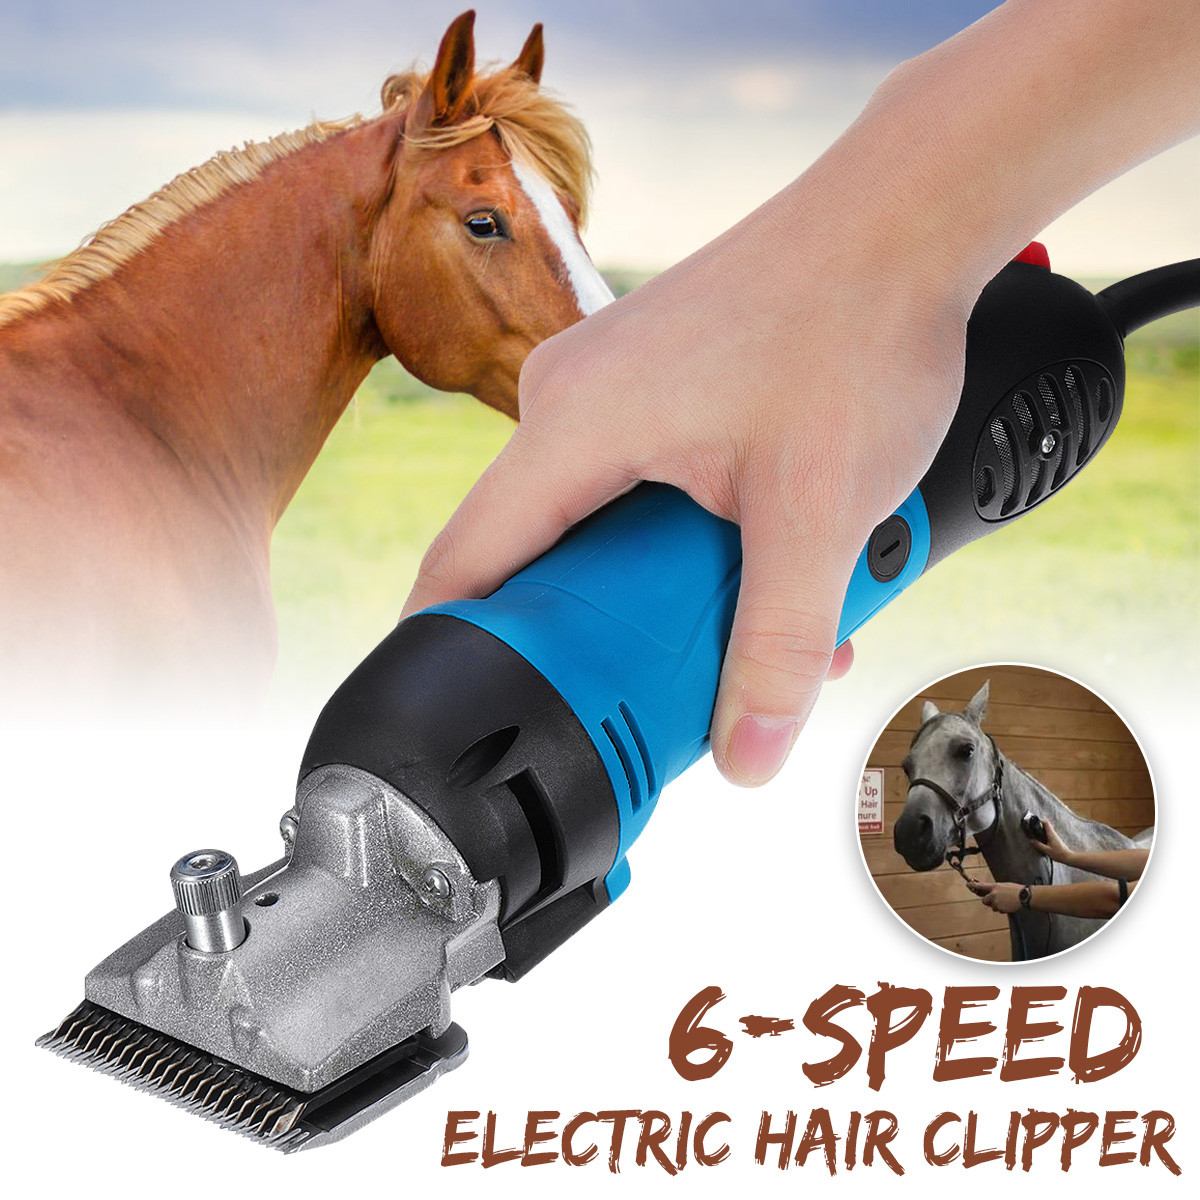 Heavy-Duty-Electric-Horse-Hair-Clipper-Multi-used-Farm-Shearing-Trimmer-Shaver-6-Speed-Regulated-She-1441907-3